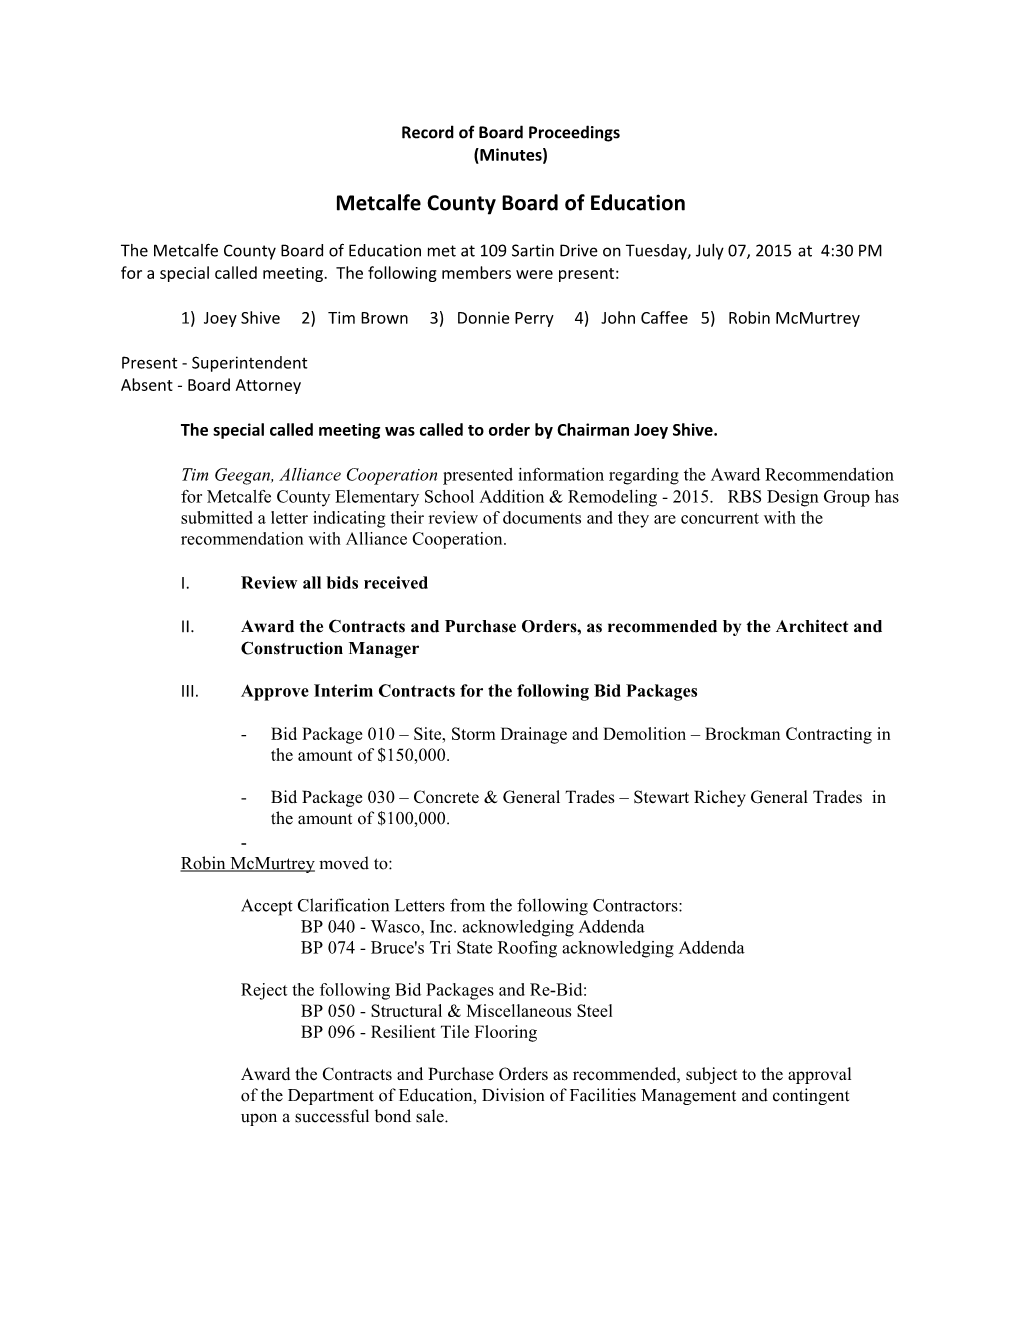 Metcalfe County Board of Education s1